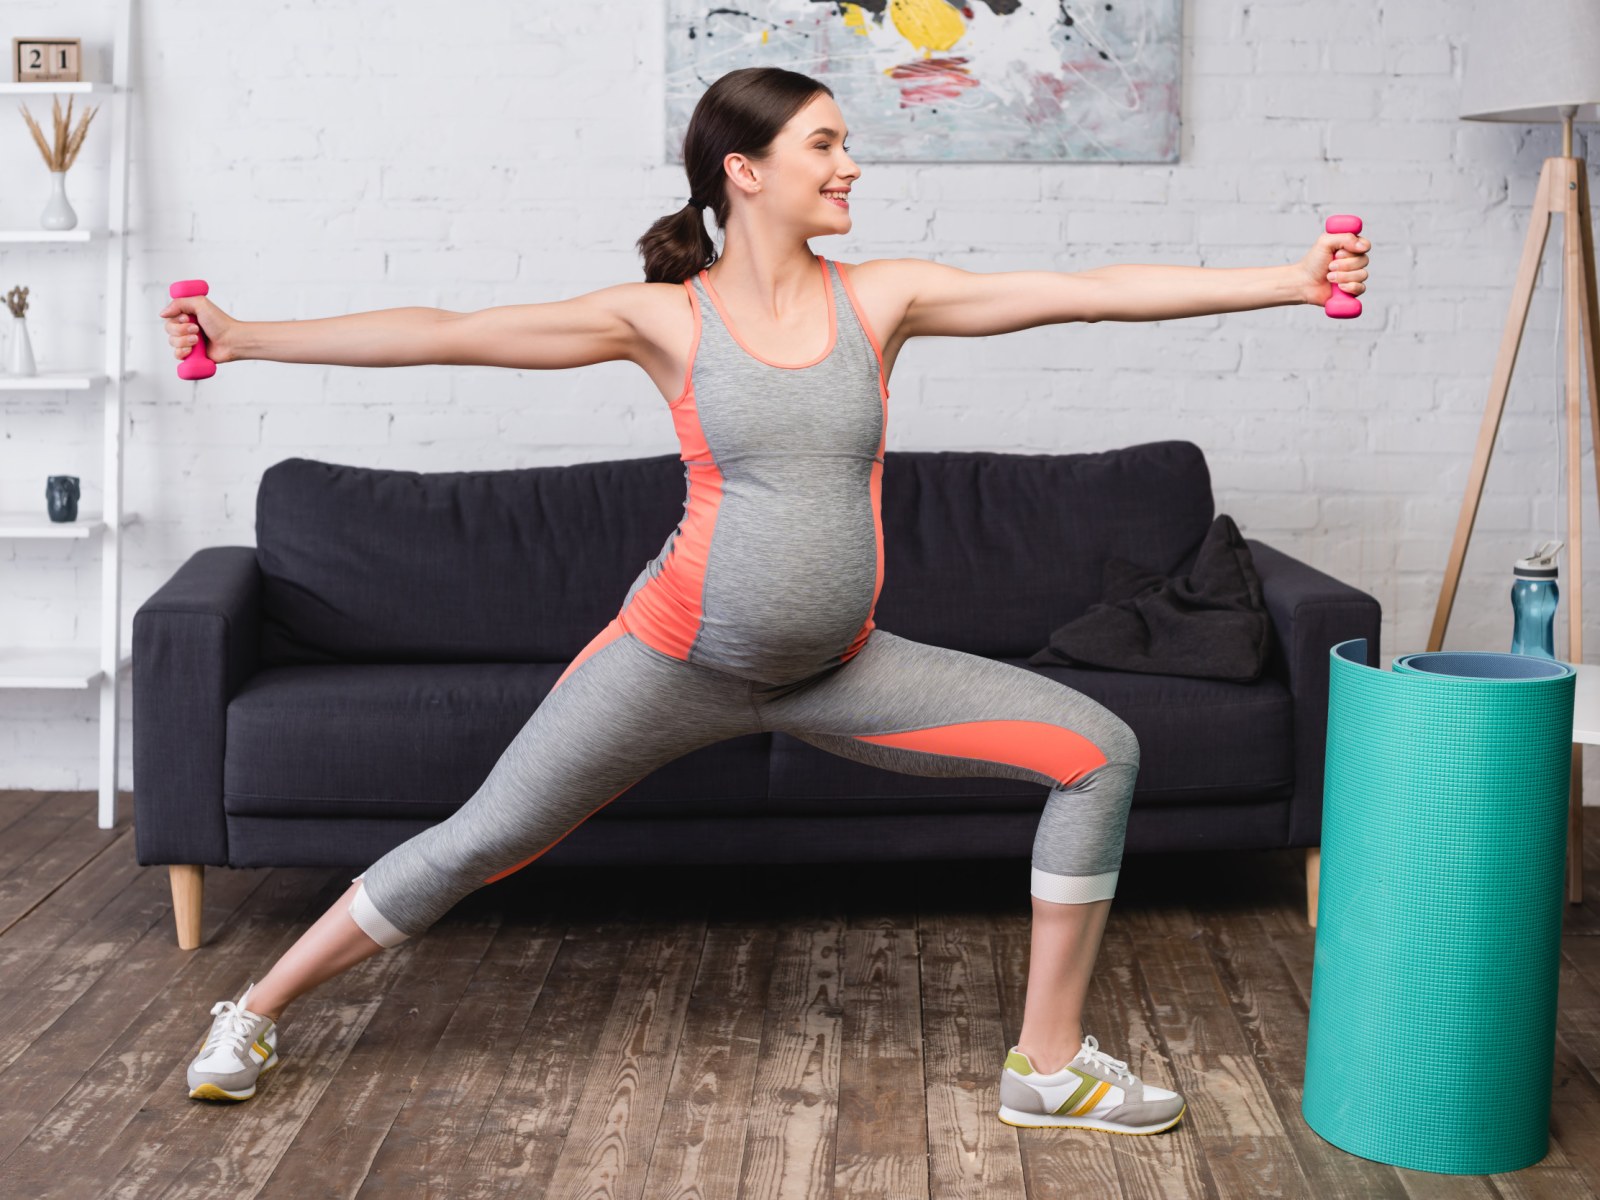 Mom Who Weight Lifted During Pregnancy Shows Off Her Baby's 'Muscle